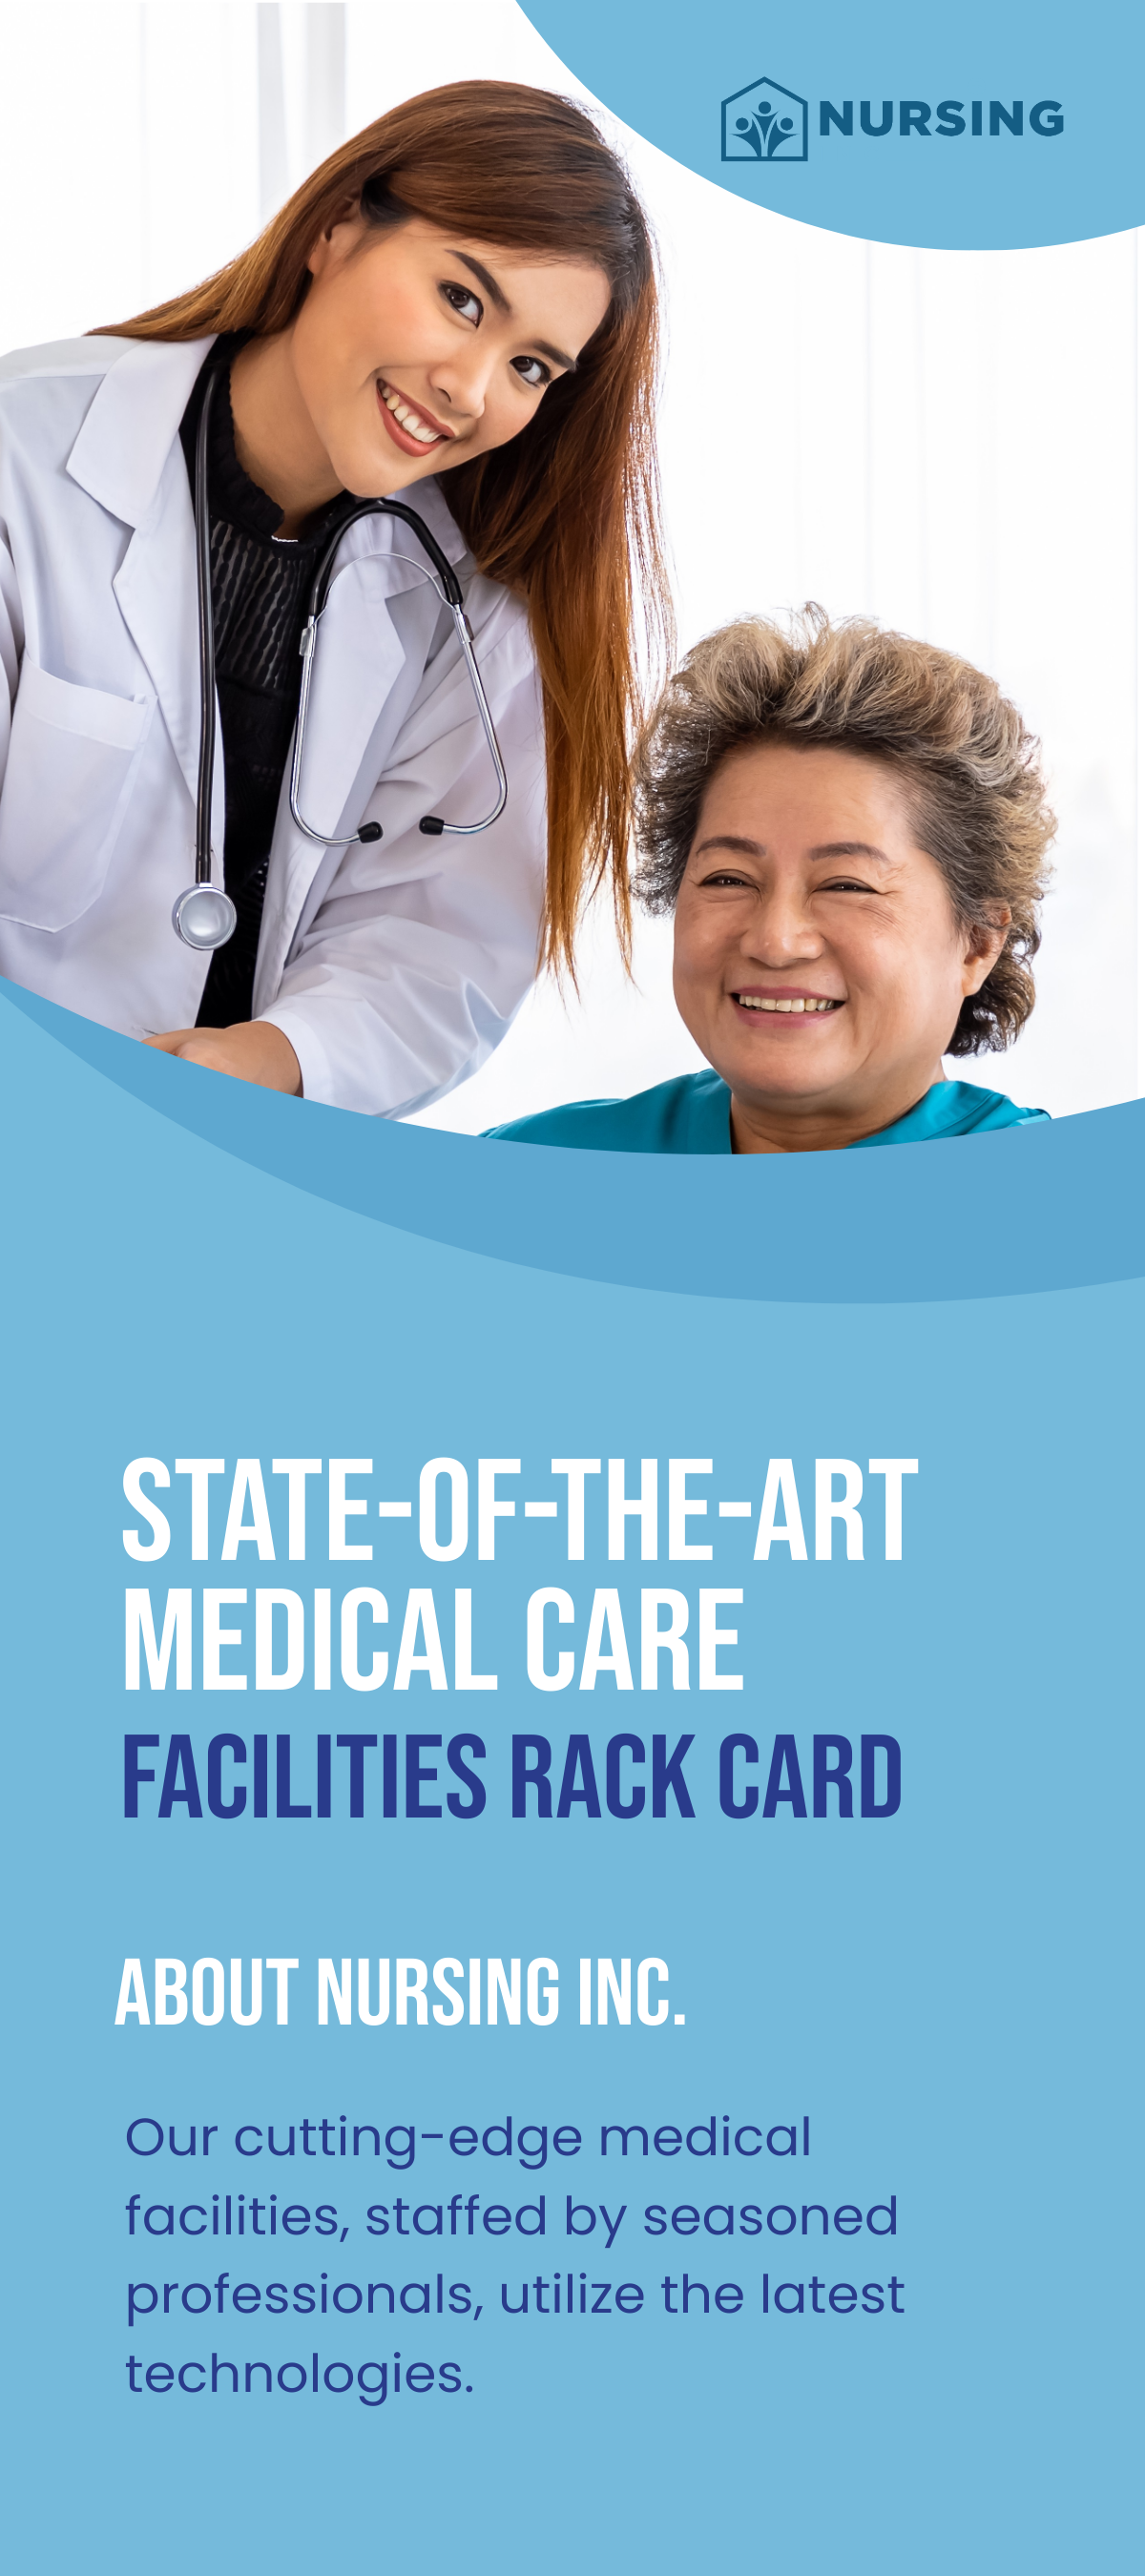 Free State-of-the-Art Medical Care Facilities Rack Card Template